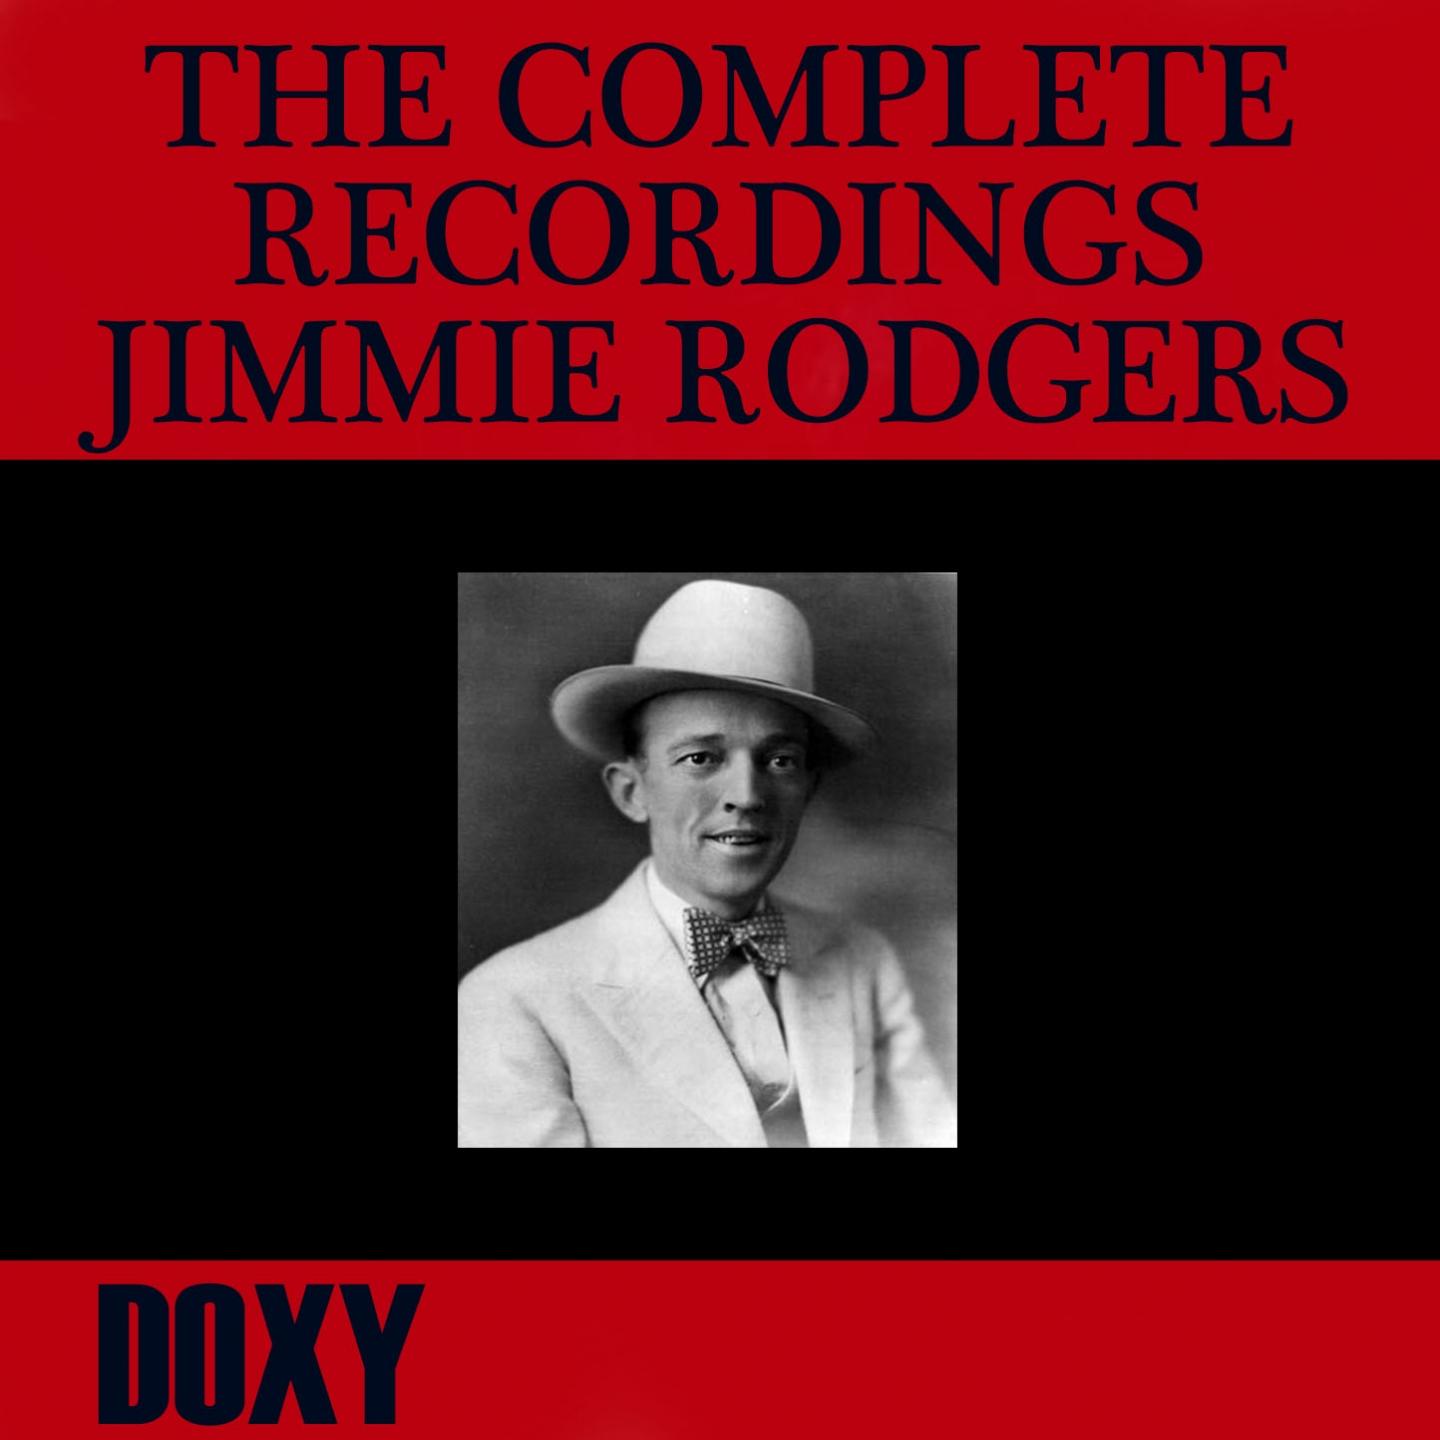 Jimmie Rodgers' Last Blue Yodel (Women Make a Fool out of Me) (Remastered)